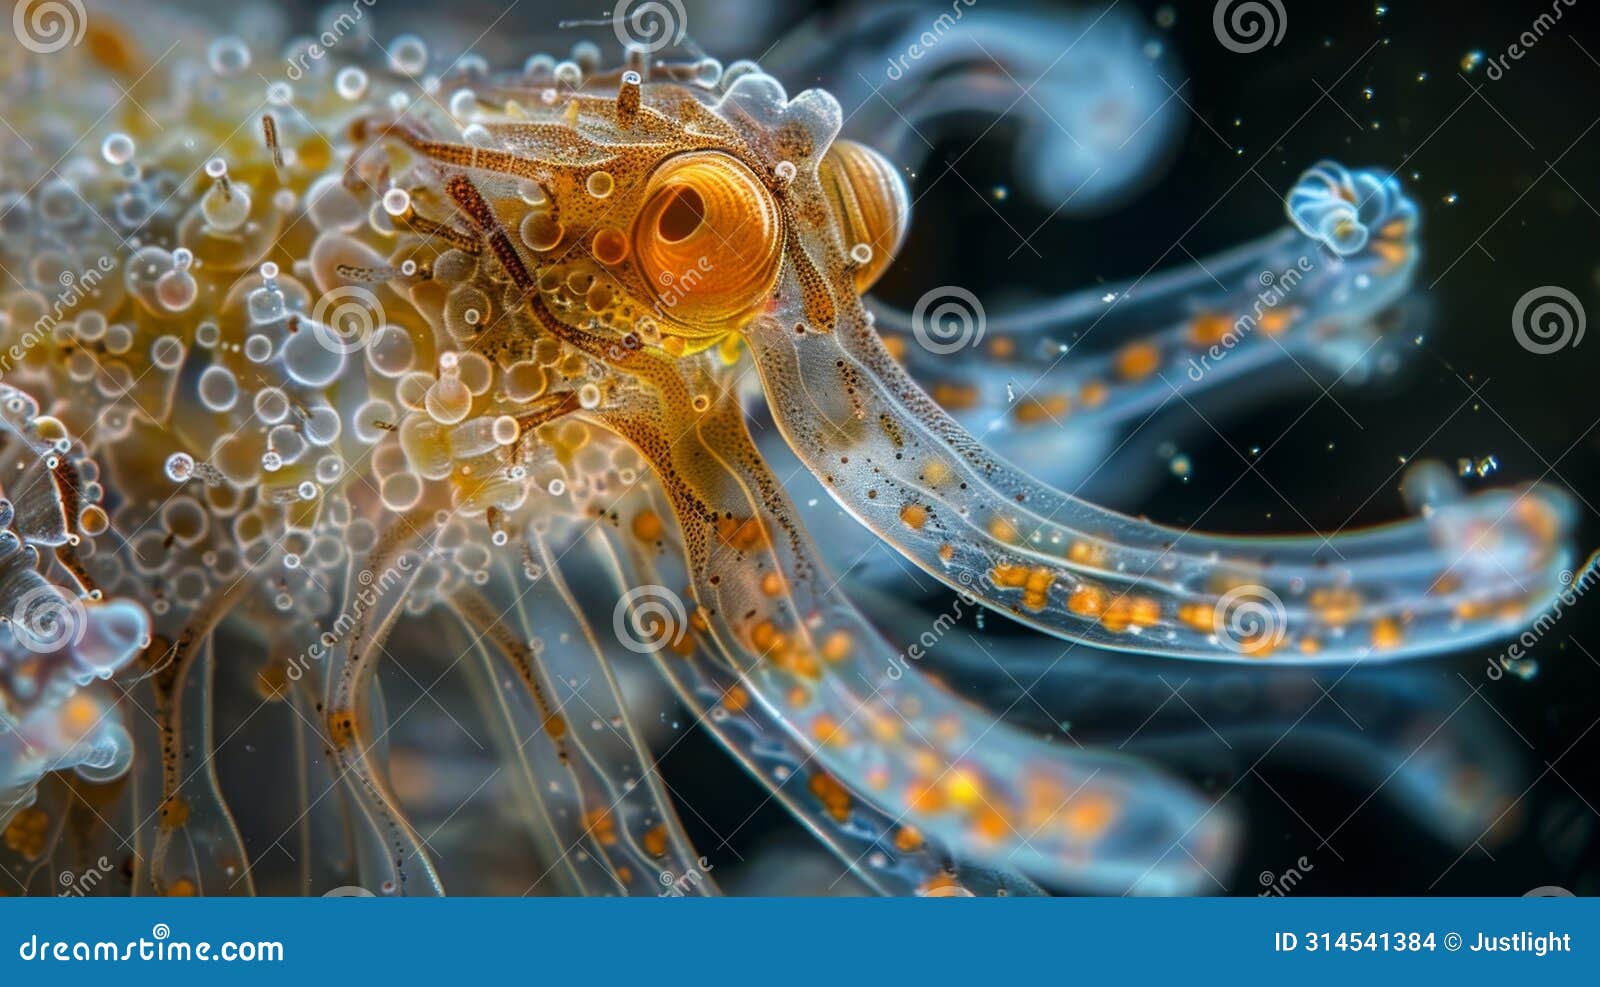 an upclose look at the intricate feeding mechanism of a protozoan as it extends its tentaclelike structures to capture